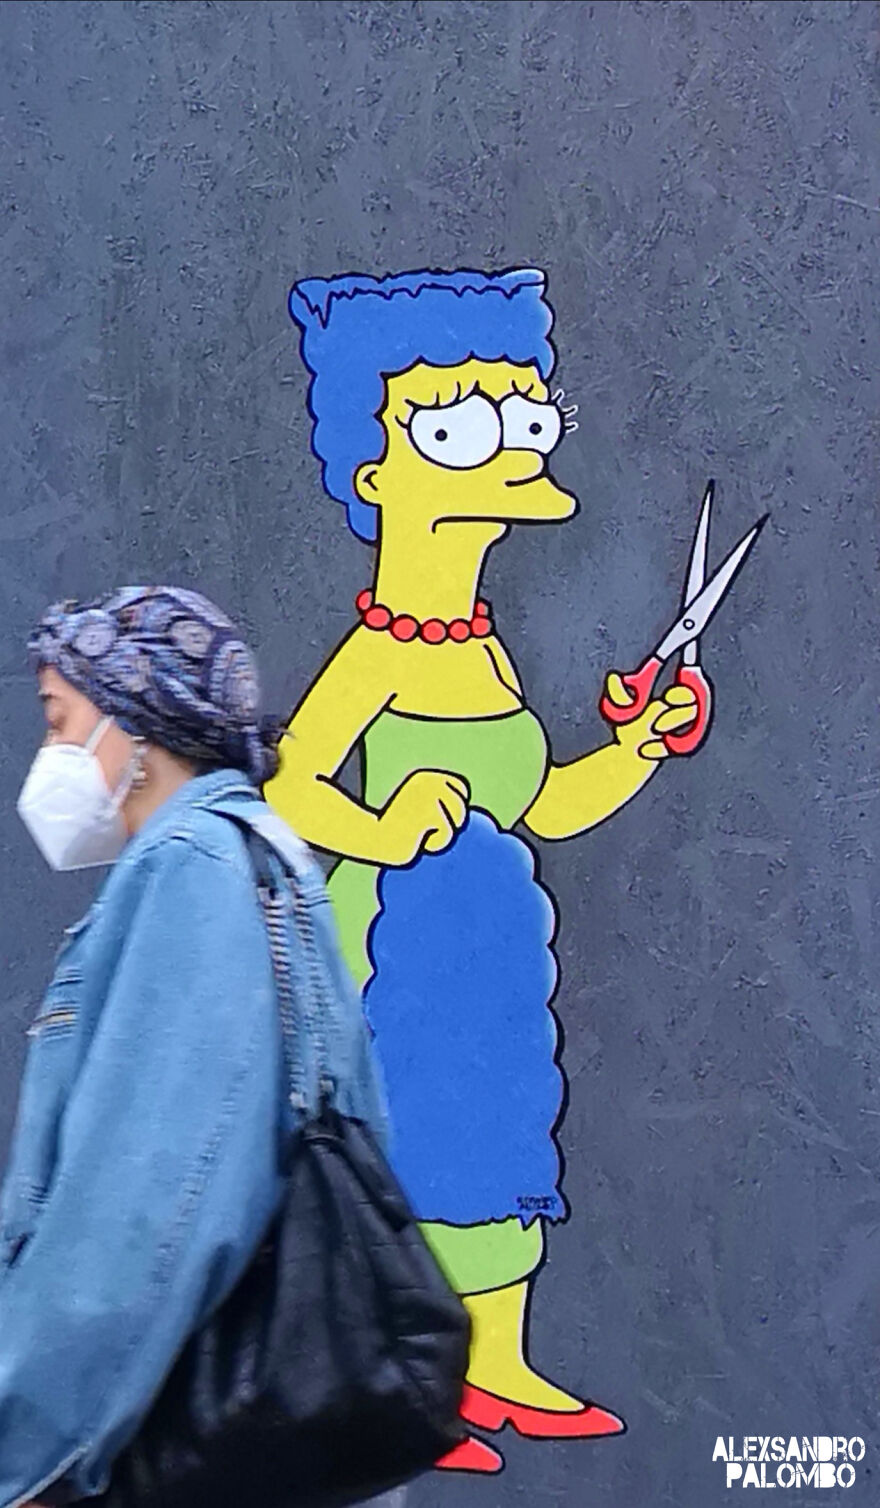 Behind "The Cut" Story Mural Featuring Marge Simpson Supporting The Iranian Protests Which Was Censored In Milan Italy